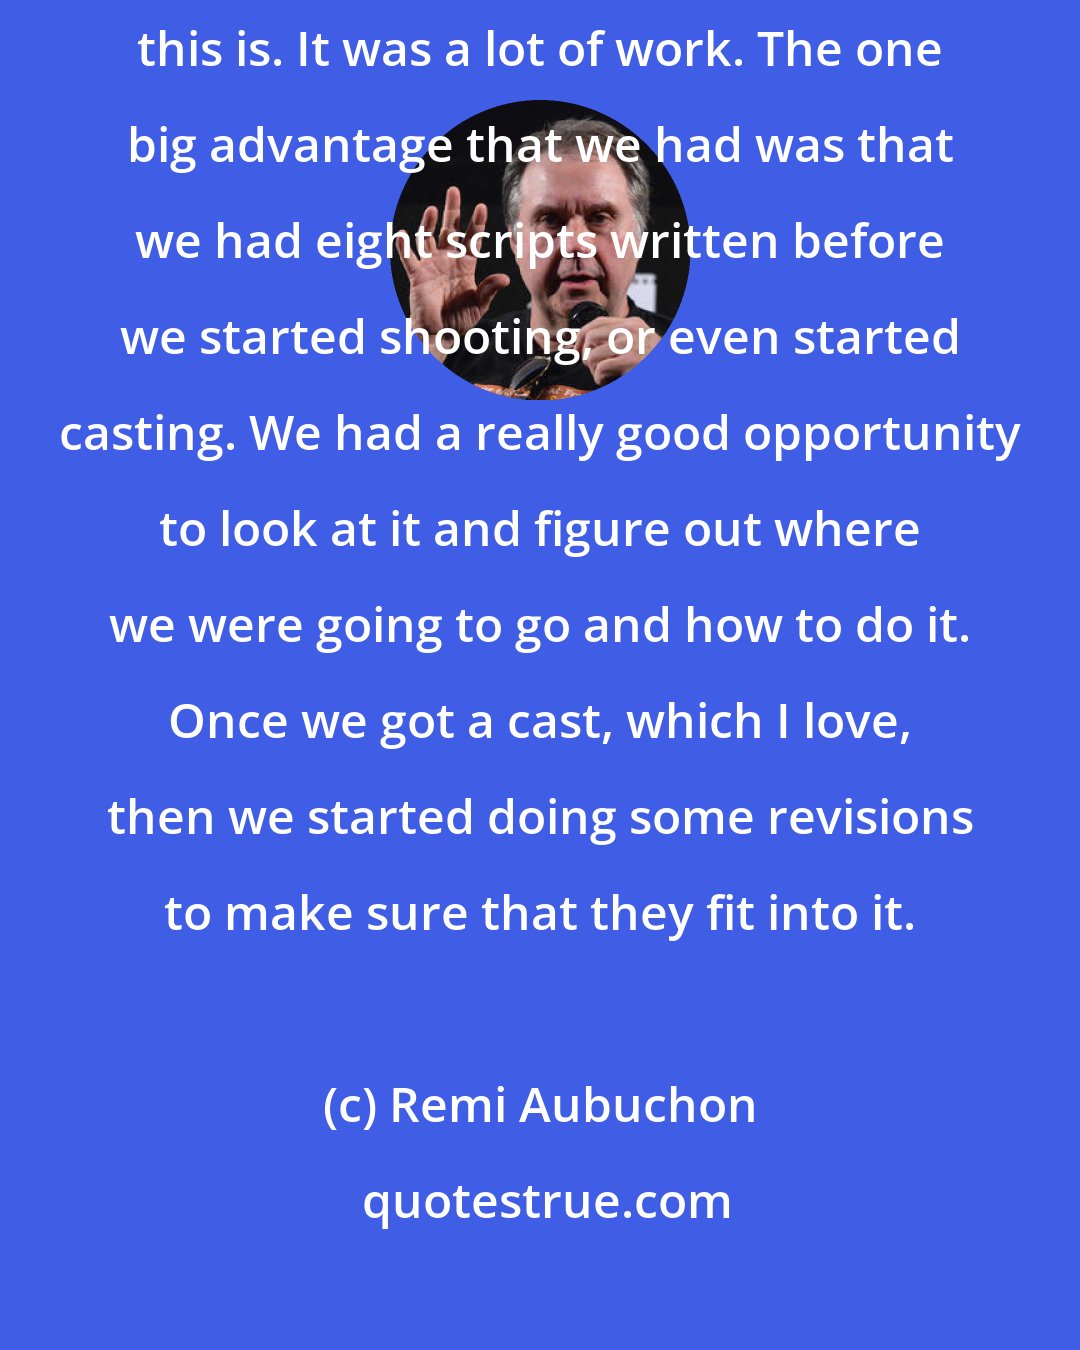 Remi Aubuchon: Suddenly, I realized how tough trying to structure a story like this is. It was a lot of work. The one big advantage that we had was that we had eight scripts written before we started shooting, or even started casting. We had a really good opportunity to look at it and figure out where we were going to go and how to do it. Once we got a cast, which I love, then we started doing some revisions to make sure that they fit into it.